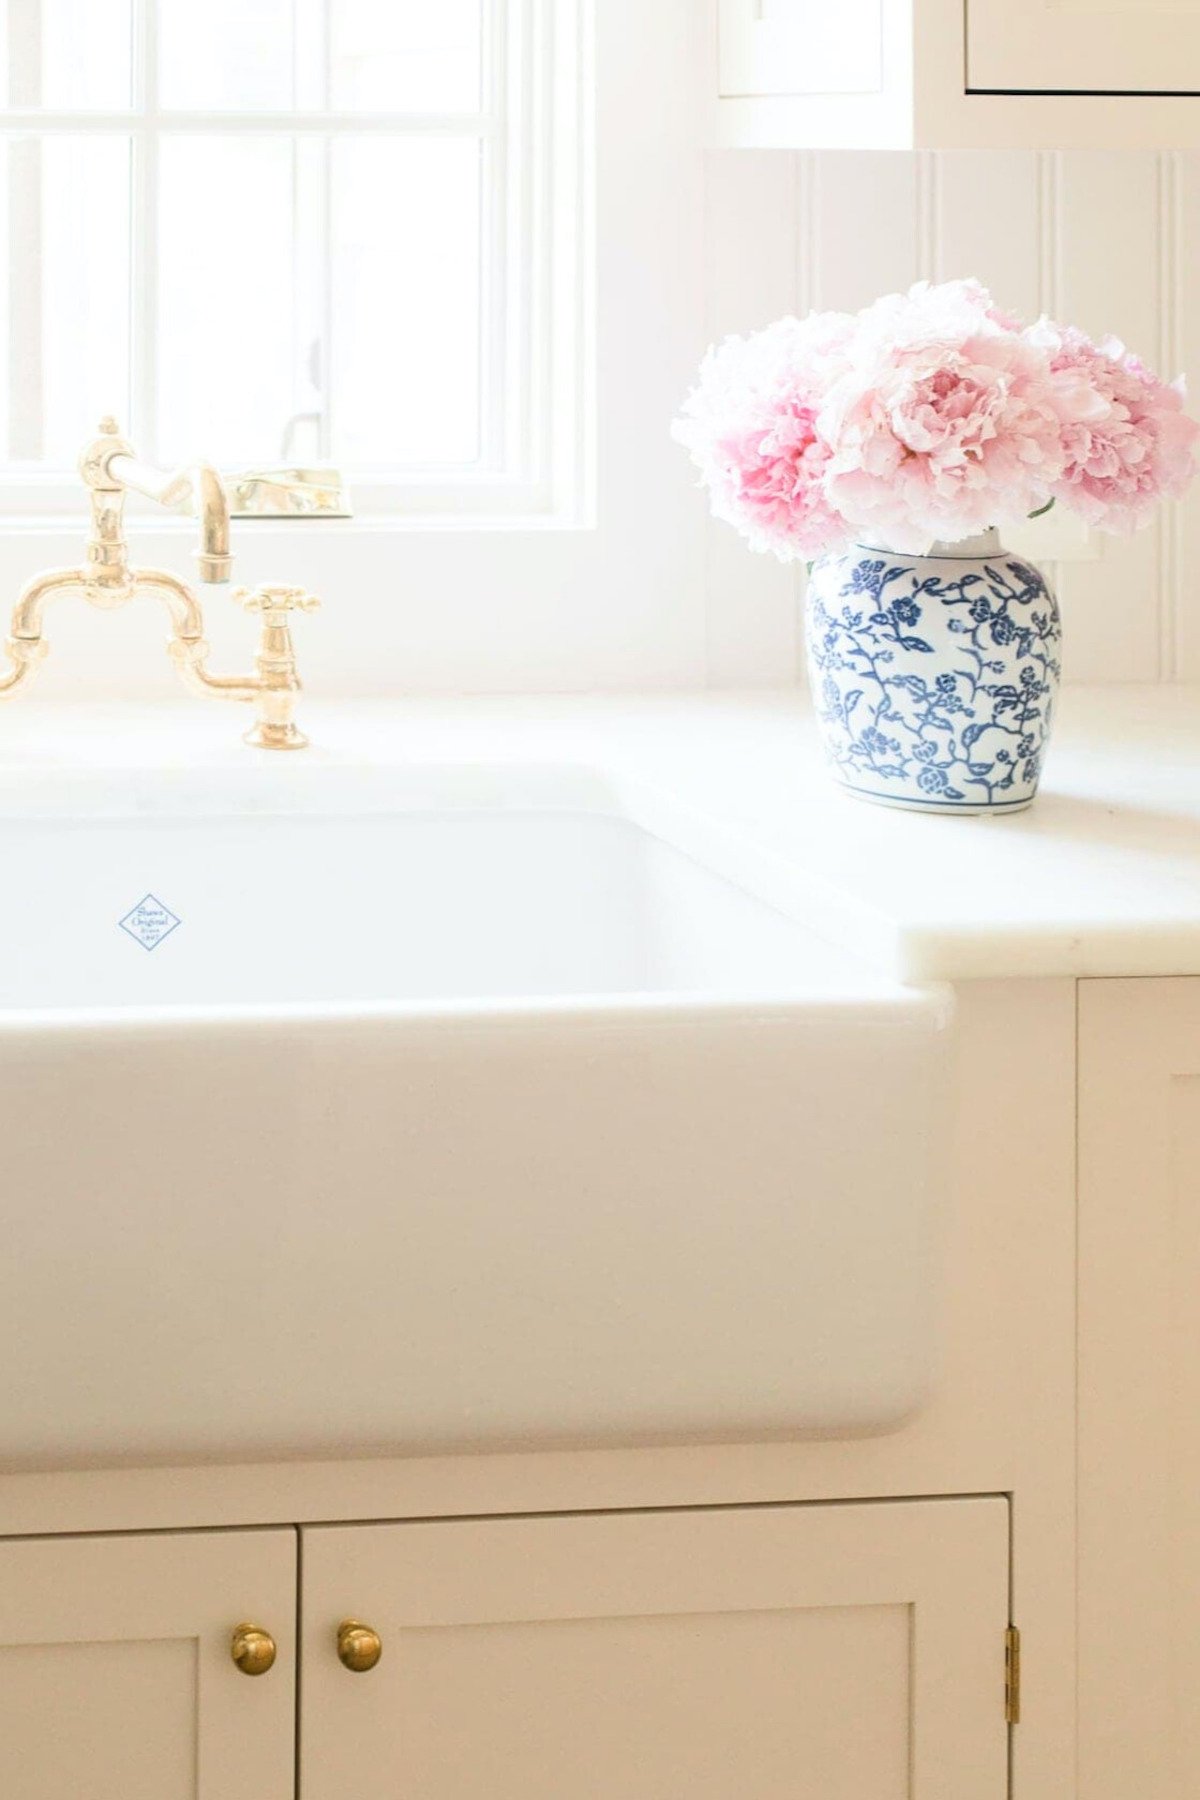 A white kitchen sink with a pink peony in a vase.